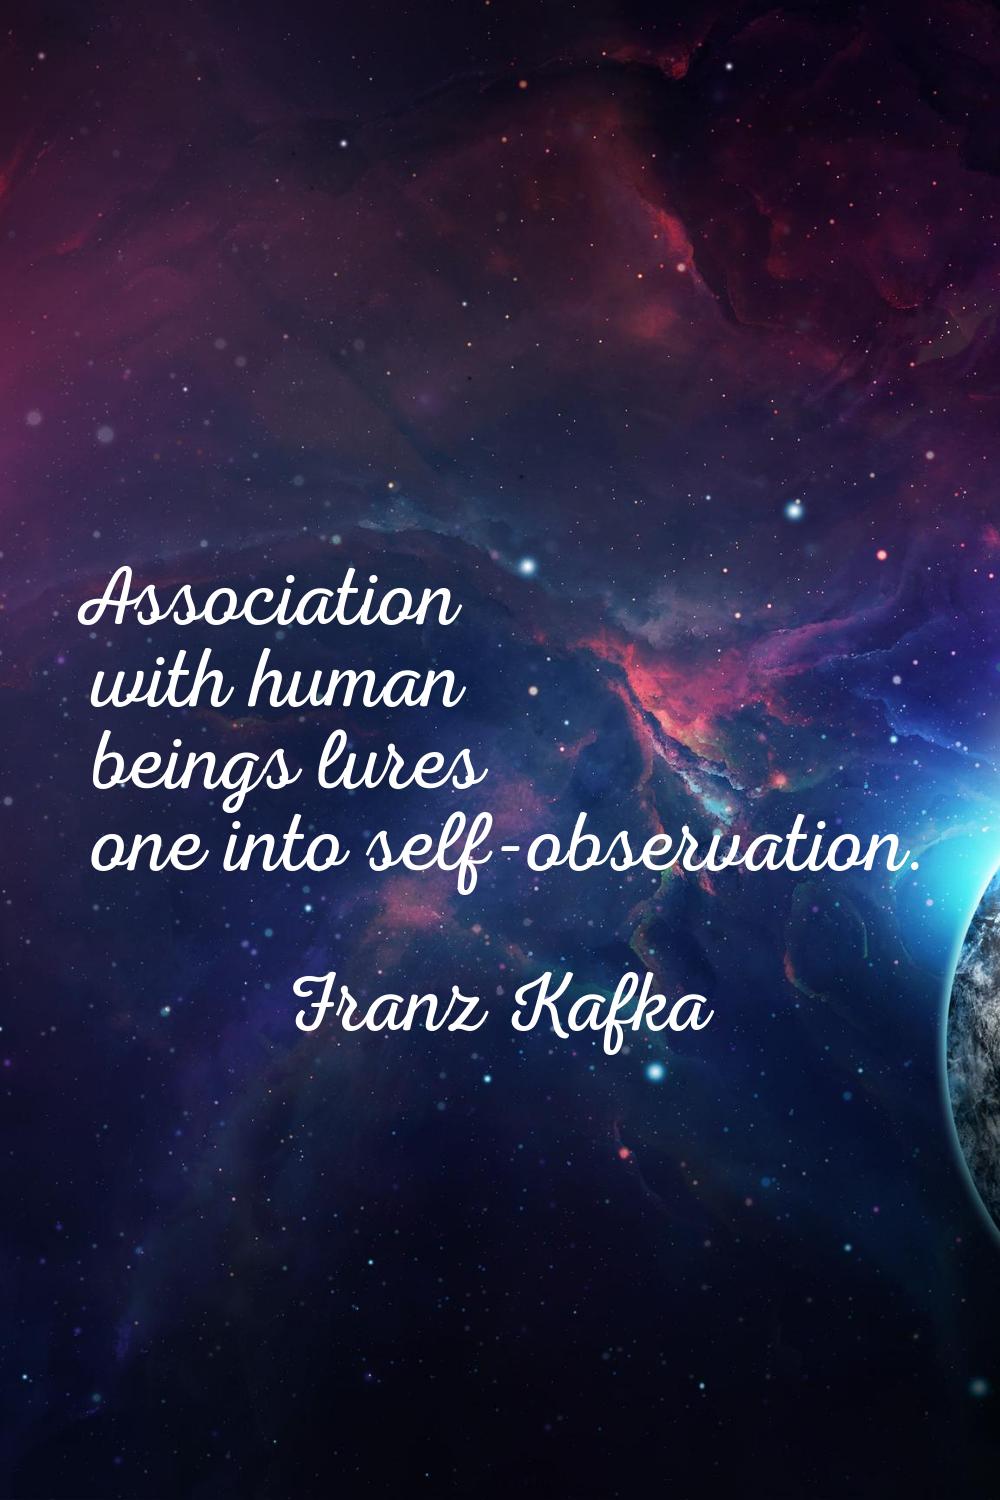 Association with human beings lures one into self-observation.